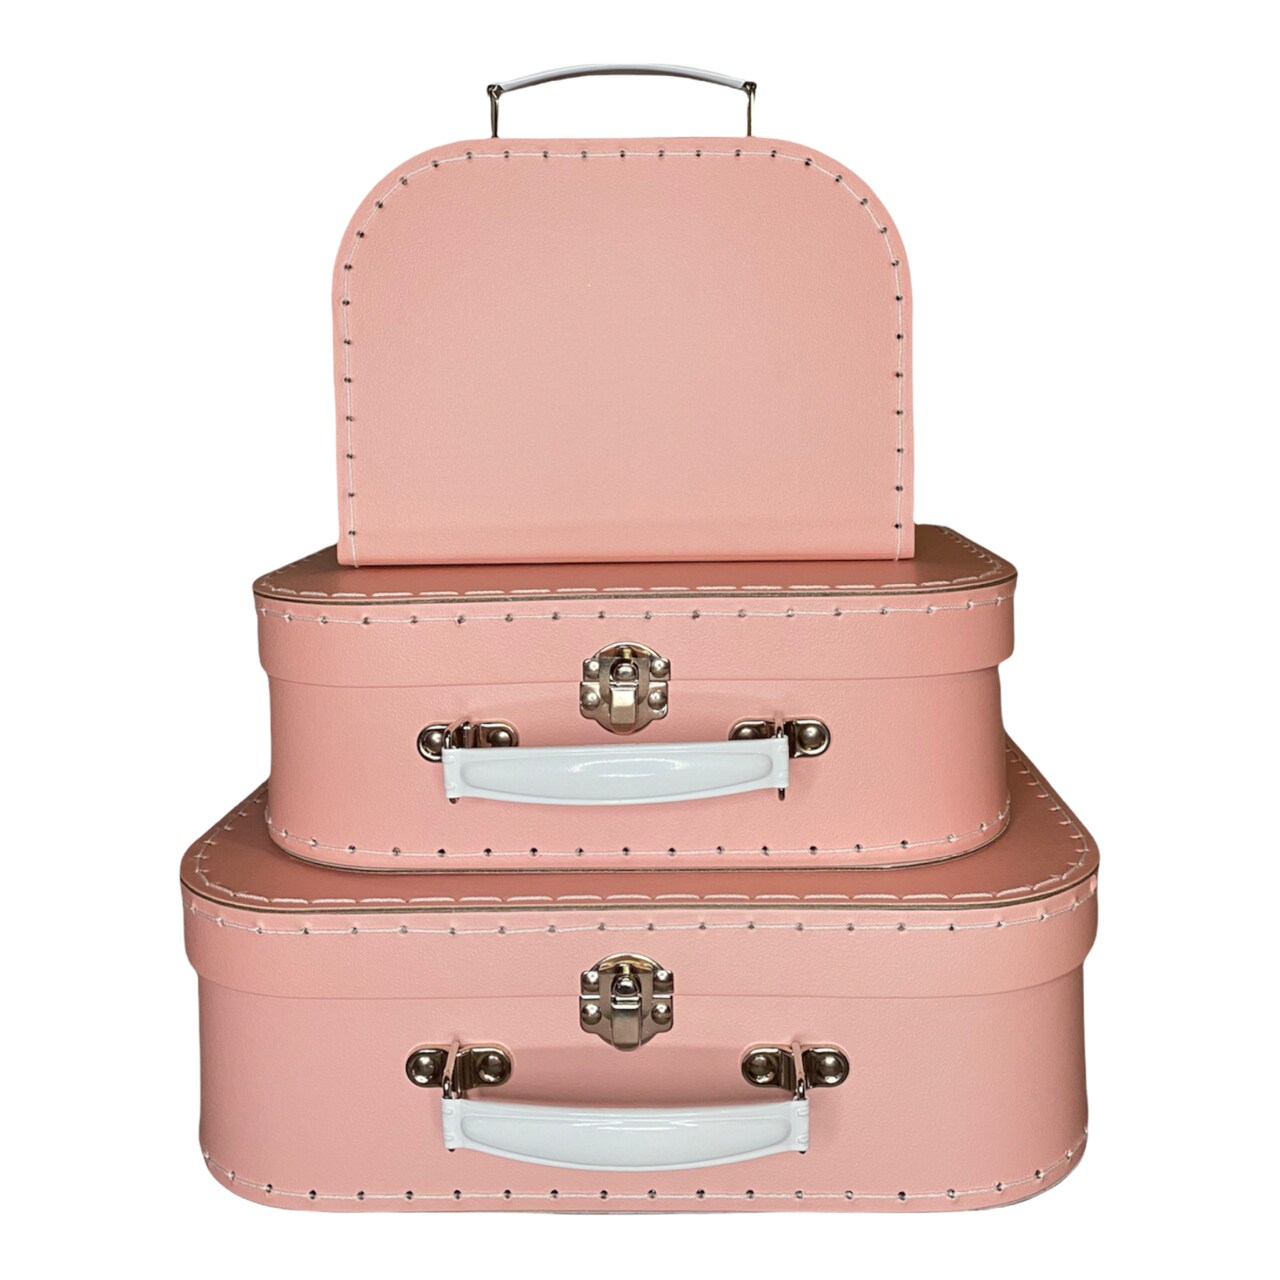 Pink Paperboard Suitcase Decorative Storage Box - Set of 3 or 1 Box of Specific Design